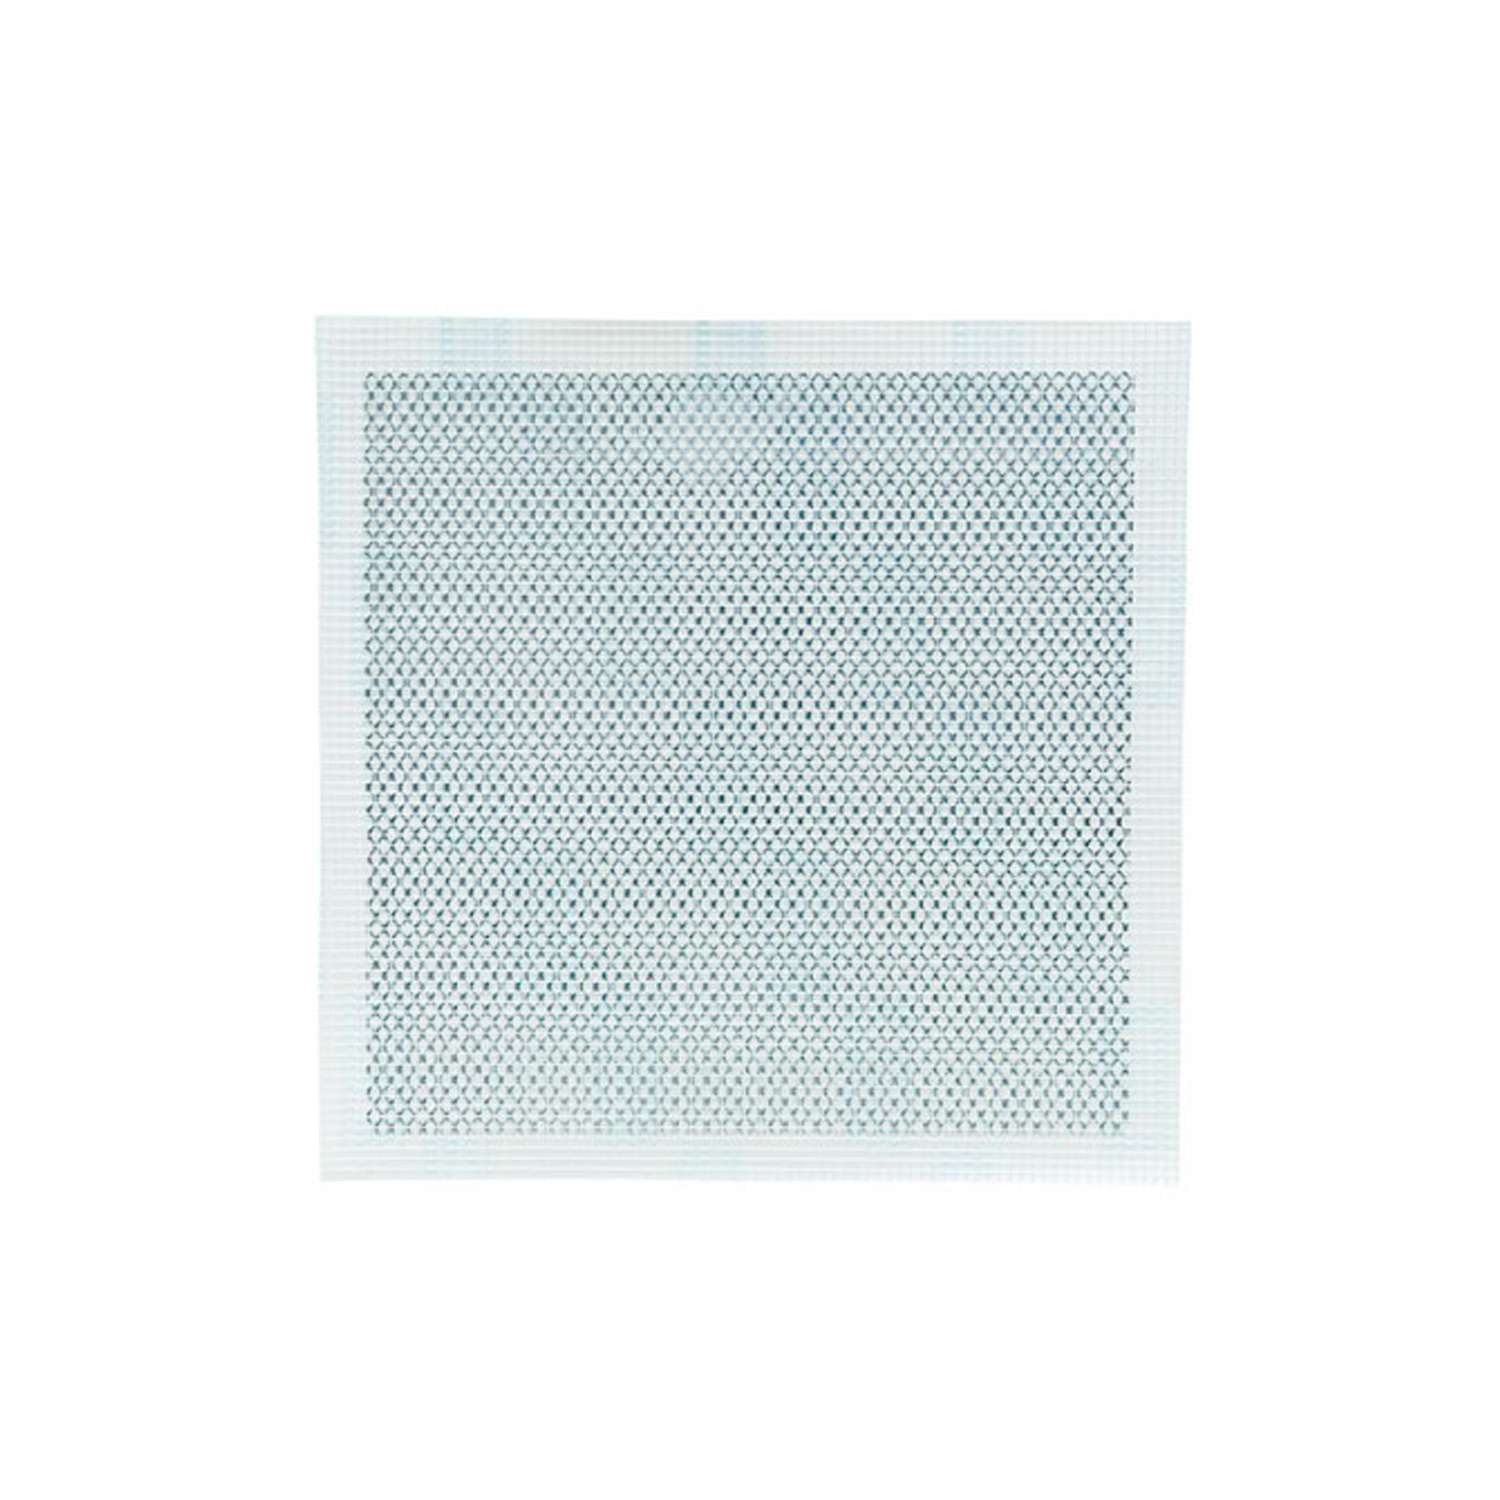 Hyde Tools Self-Adhesive Aluminum Drywall Patch, 6 x 6